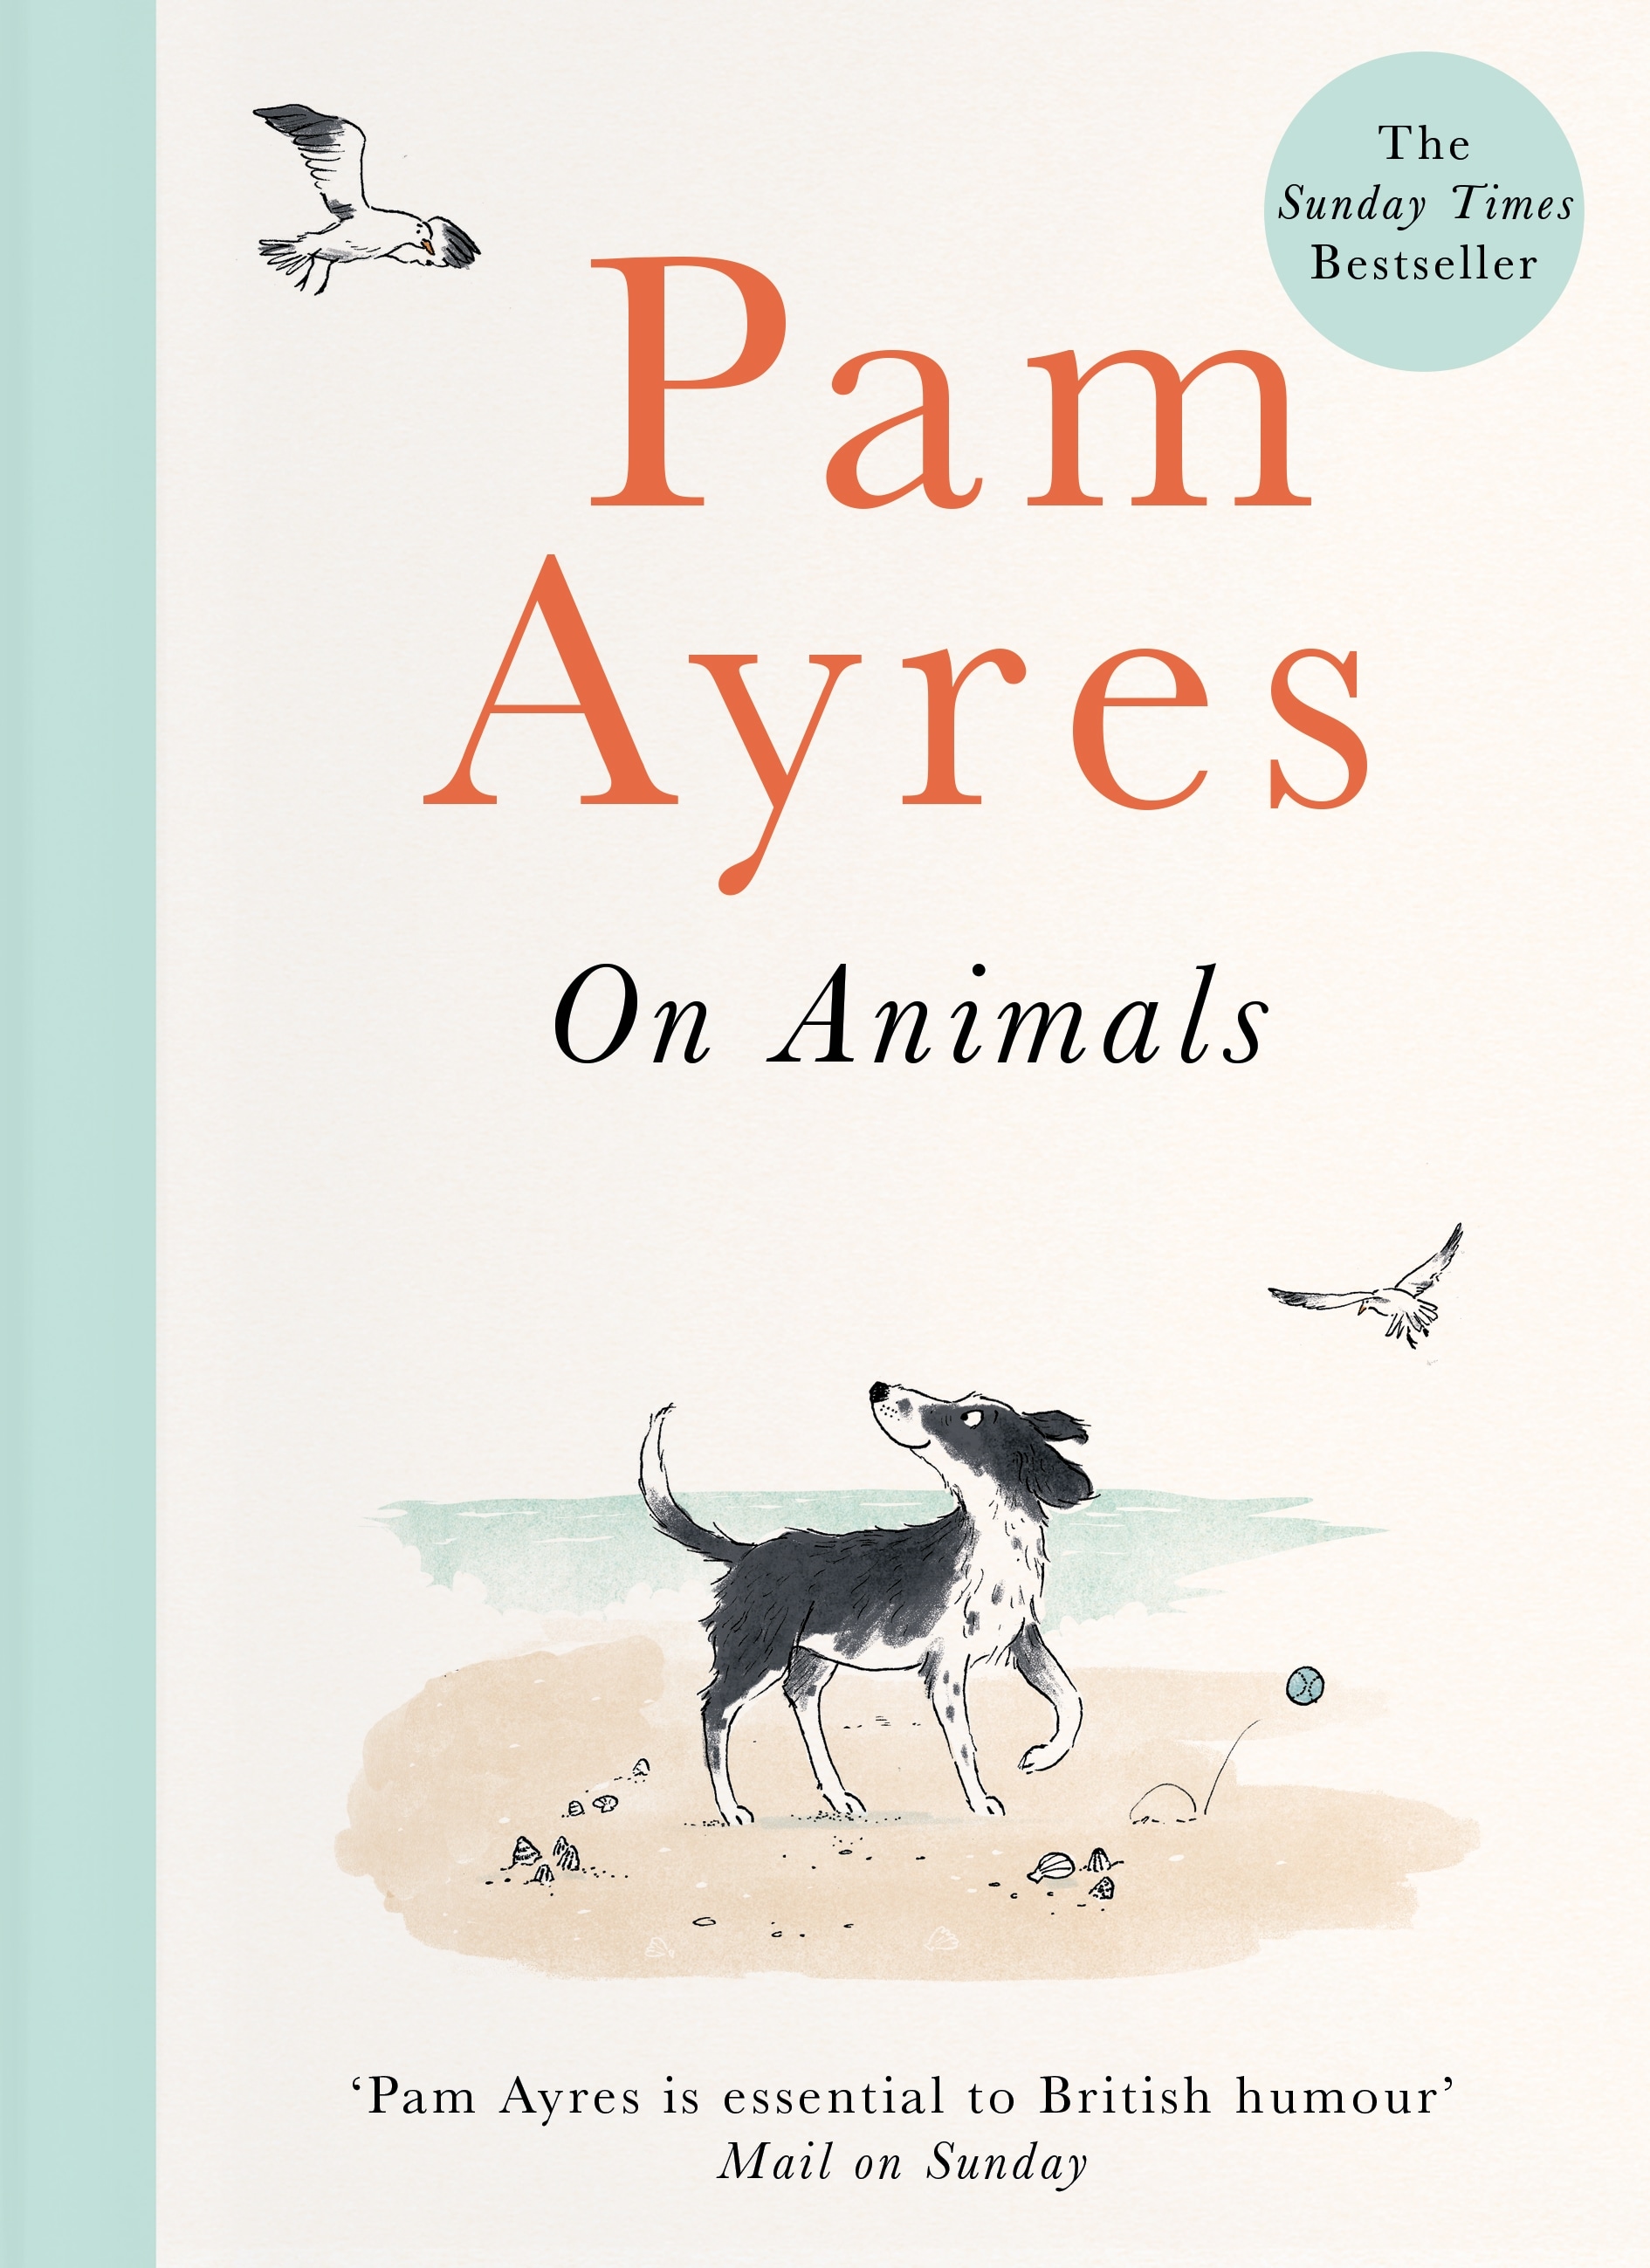 Book “Pam Ayres on Animals” by Pam Ayres — September 16, 2021